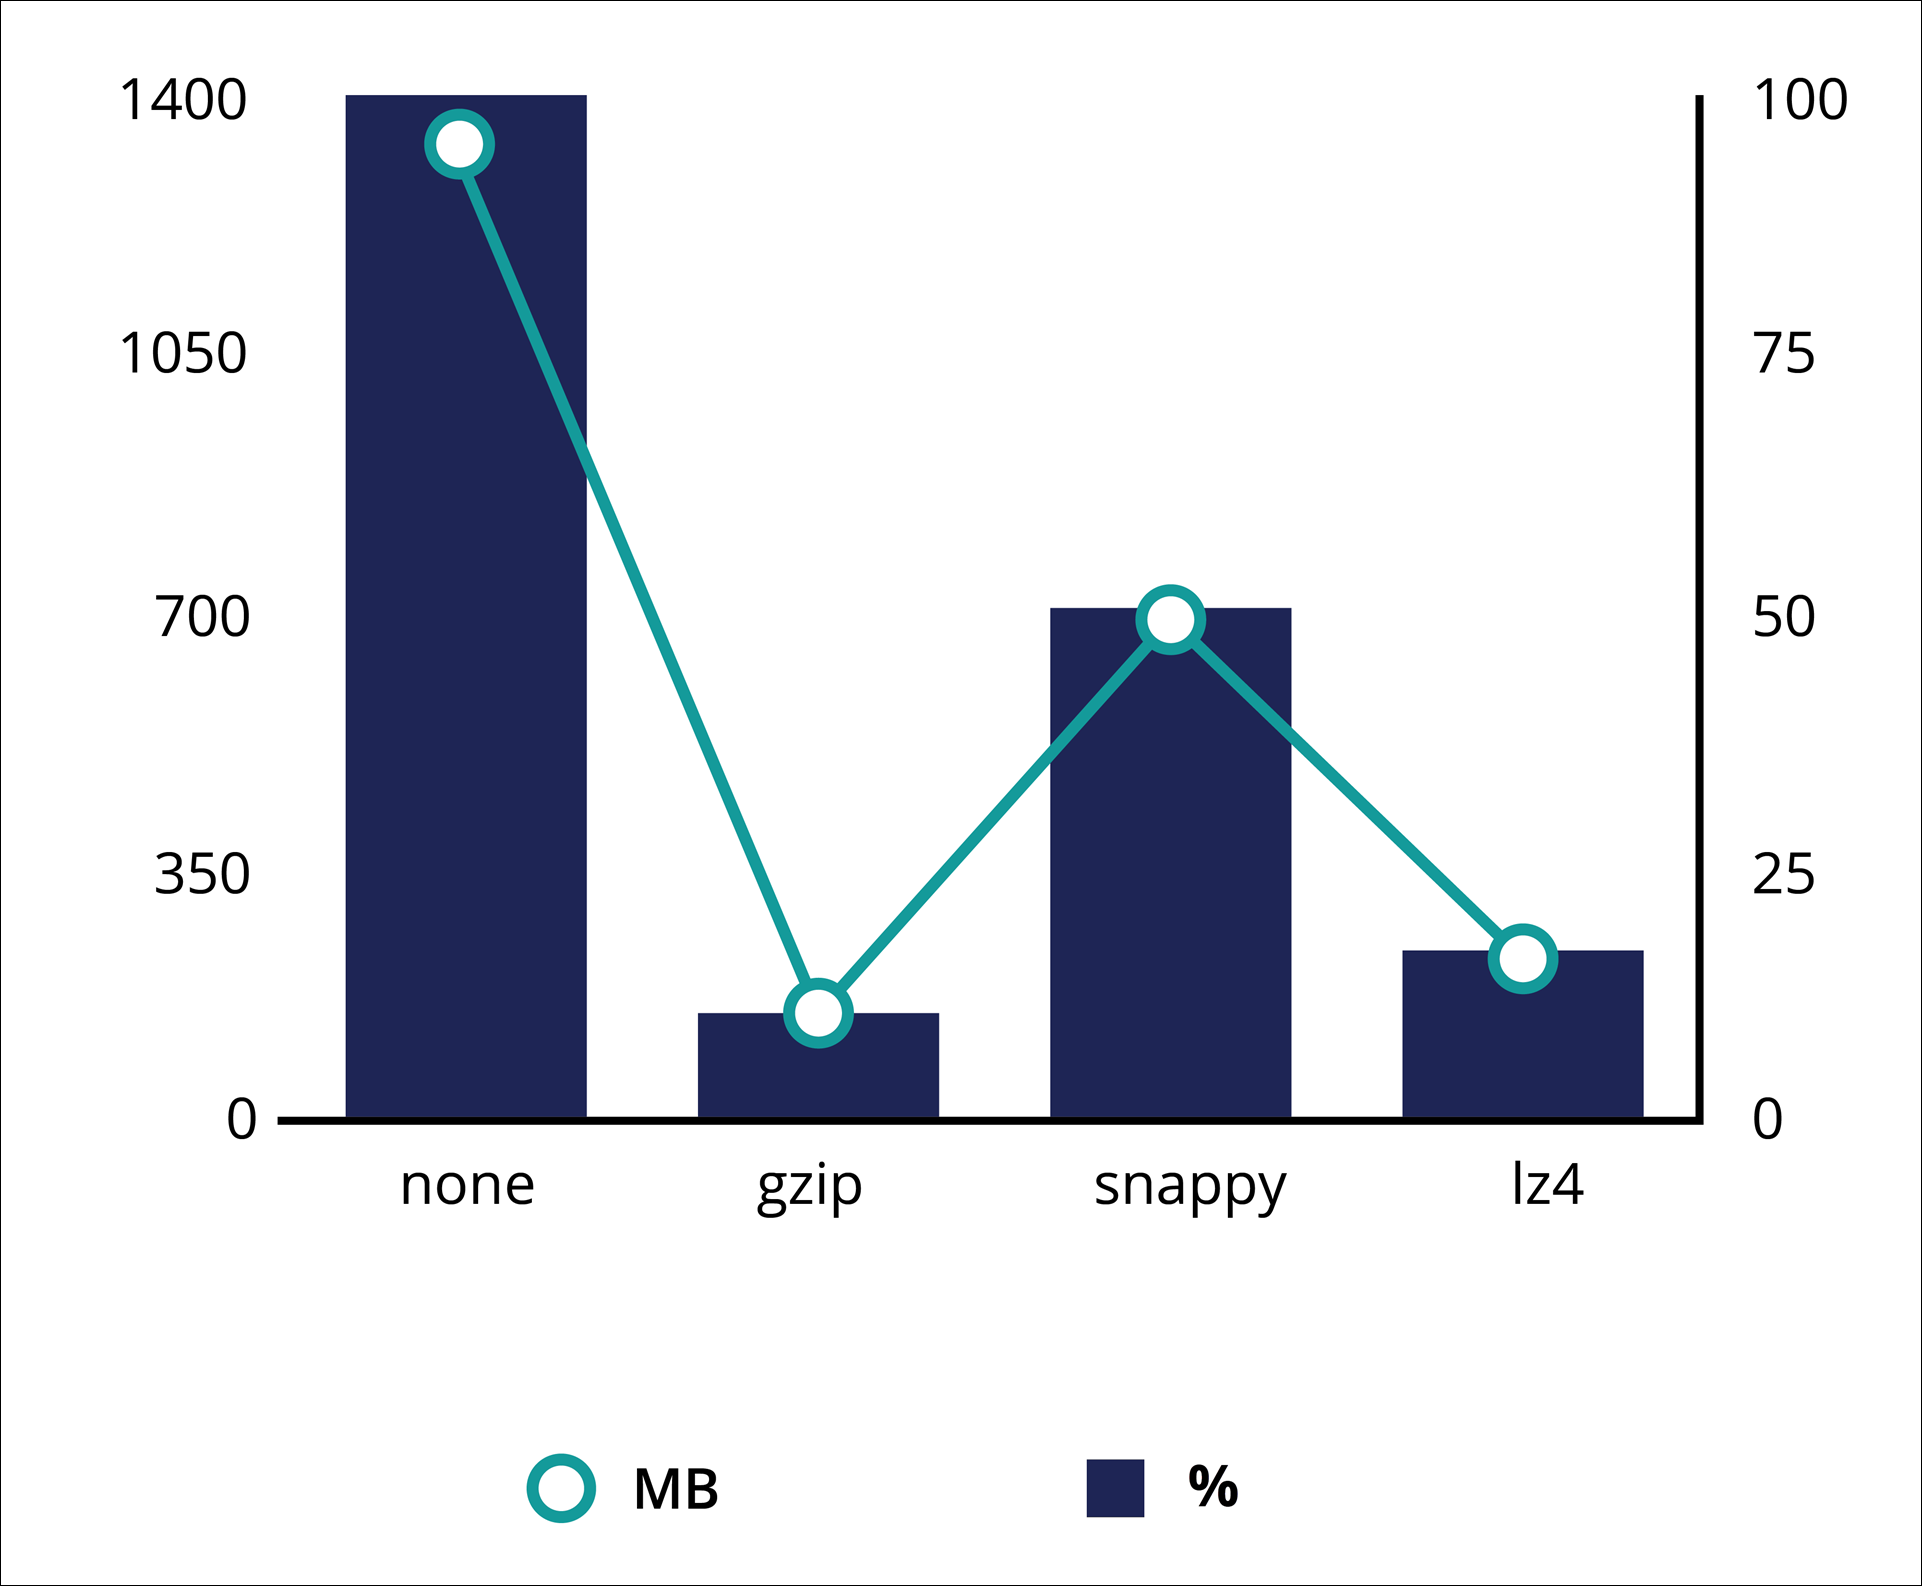 Disk usage is relatively low for gzip and LZ4, and high for Snappy. The chart shows usage in MB and as disk size percentage.